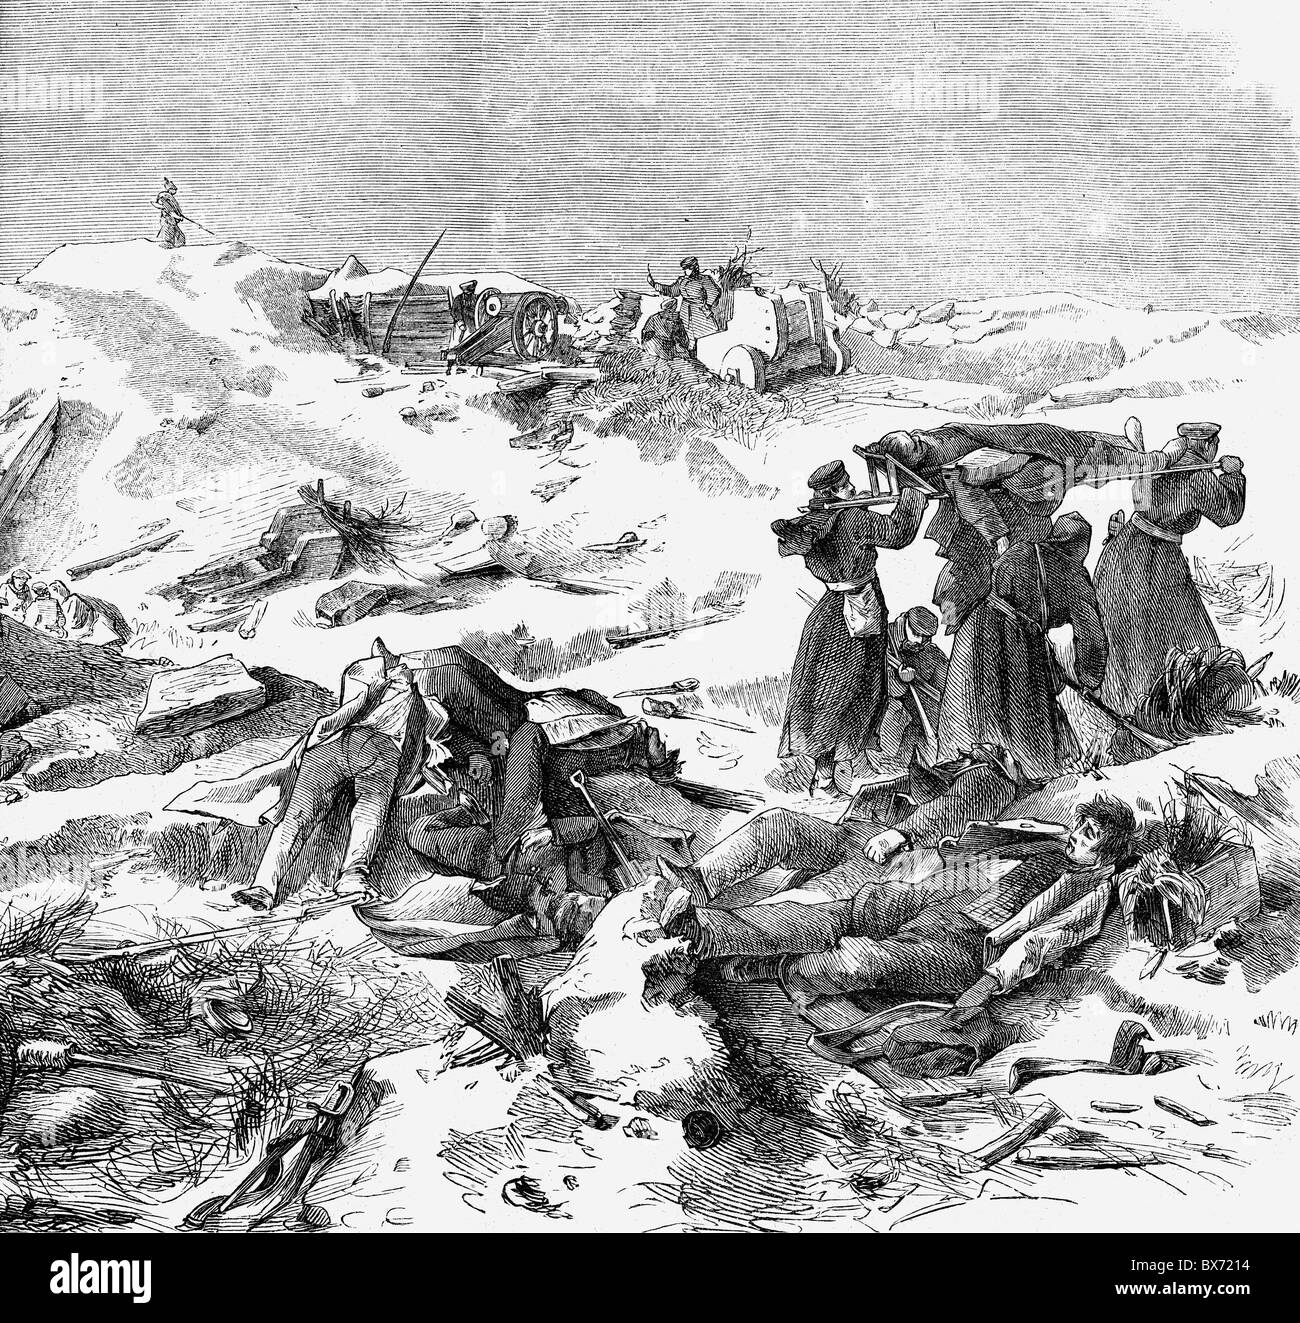 events, Second Schleswig War 1864, Battle of Dybbol, 18.4.1864, redoubt No. 2 after the battle, wood engraving after drawing by Otto Guenther, detail, 19th century, Denmark, Germany, Wars of German Unification, historic, historical, medical service, soldiers, medicine, ambulance men, medics, corpsmen, corpsman, carrying, stretcher, dead bodies, corpses, fallen, entrenchment, entrenchments, Gunther, Günther, people, Additional-Rights-Clearences-Not Available Stock Photo